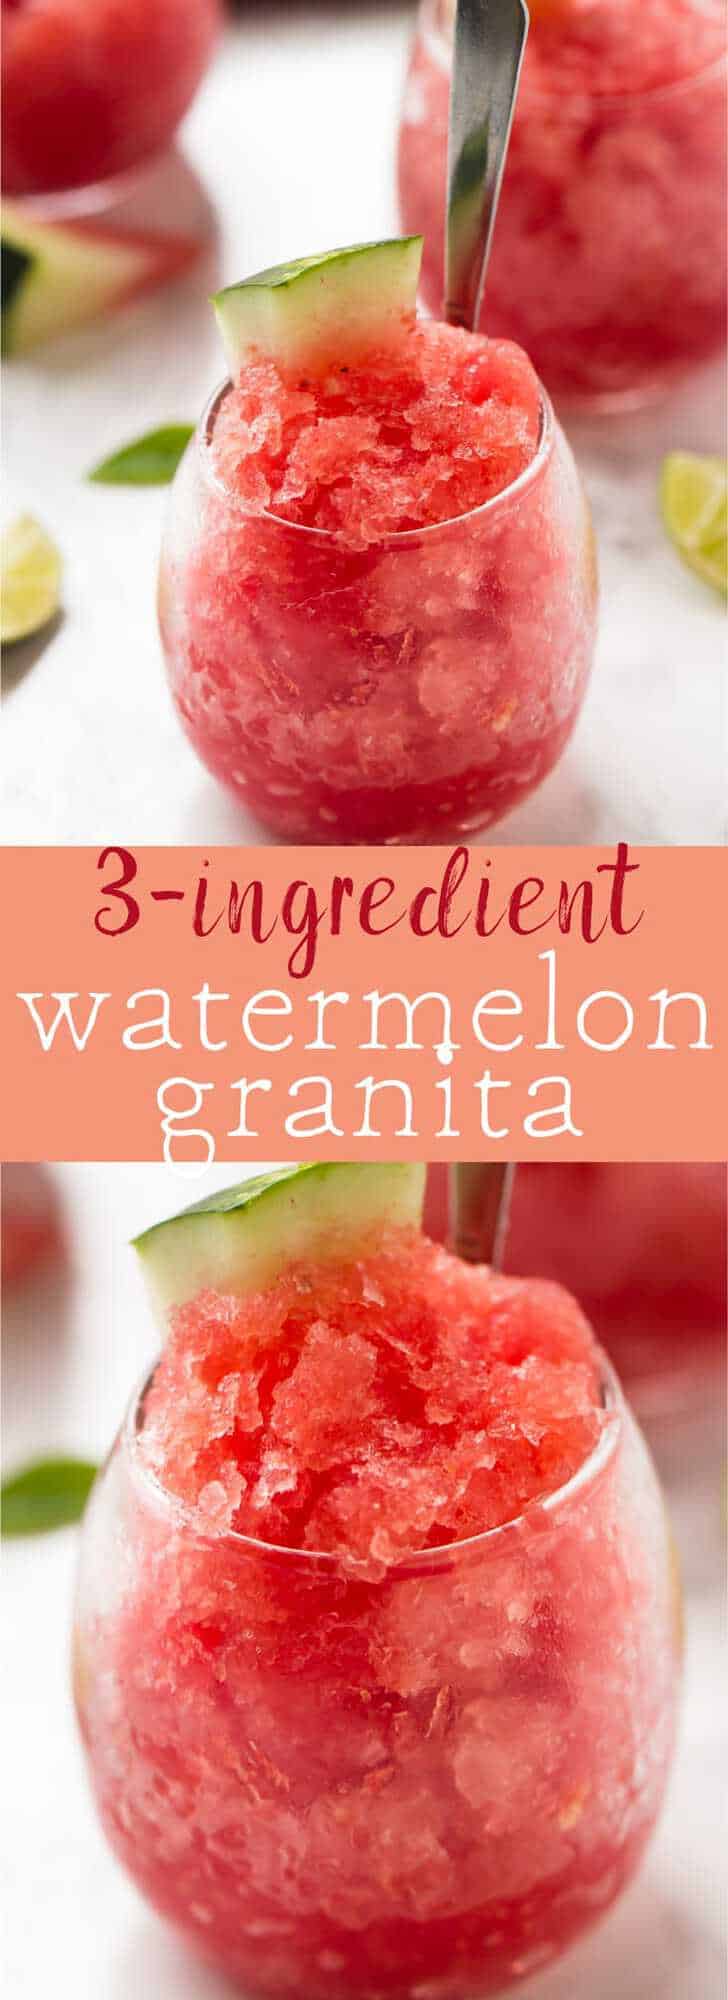 This Watermelon Granita is the easiest dessert you'll ever make! It's only 3 ingredients, completely healthy and tastes unbelievably delicious! via https://jessicainthekitchen.com